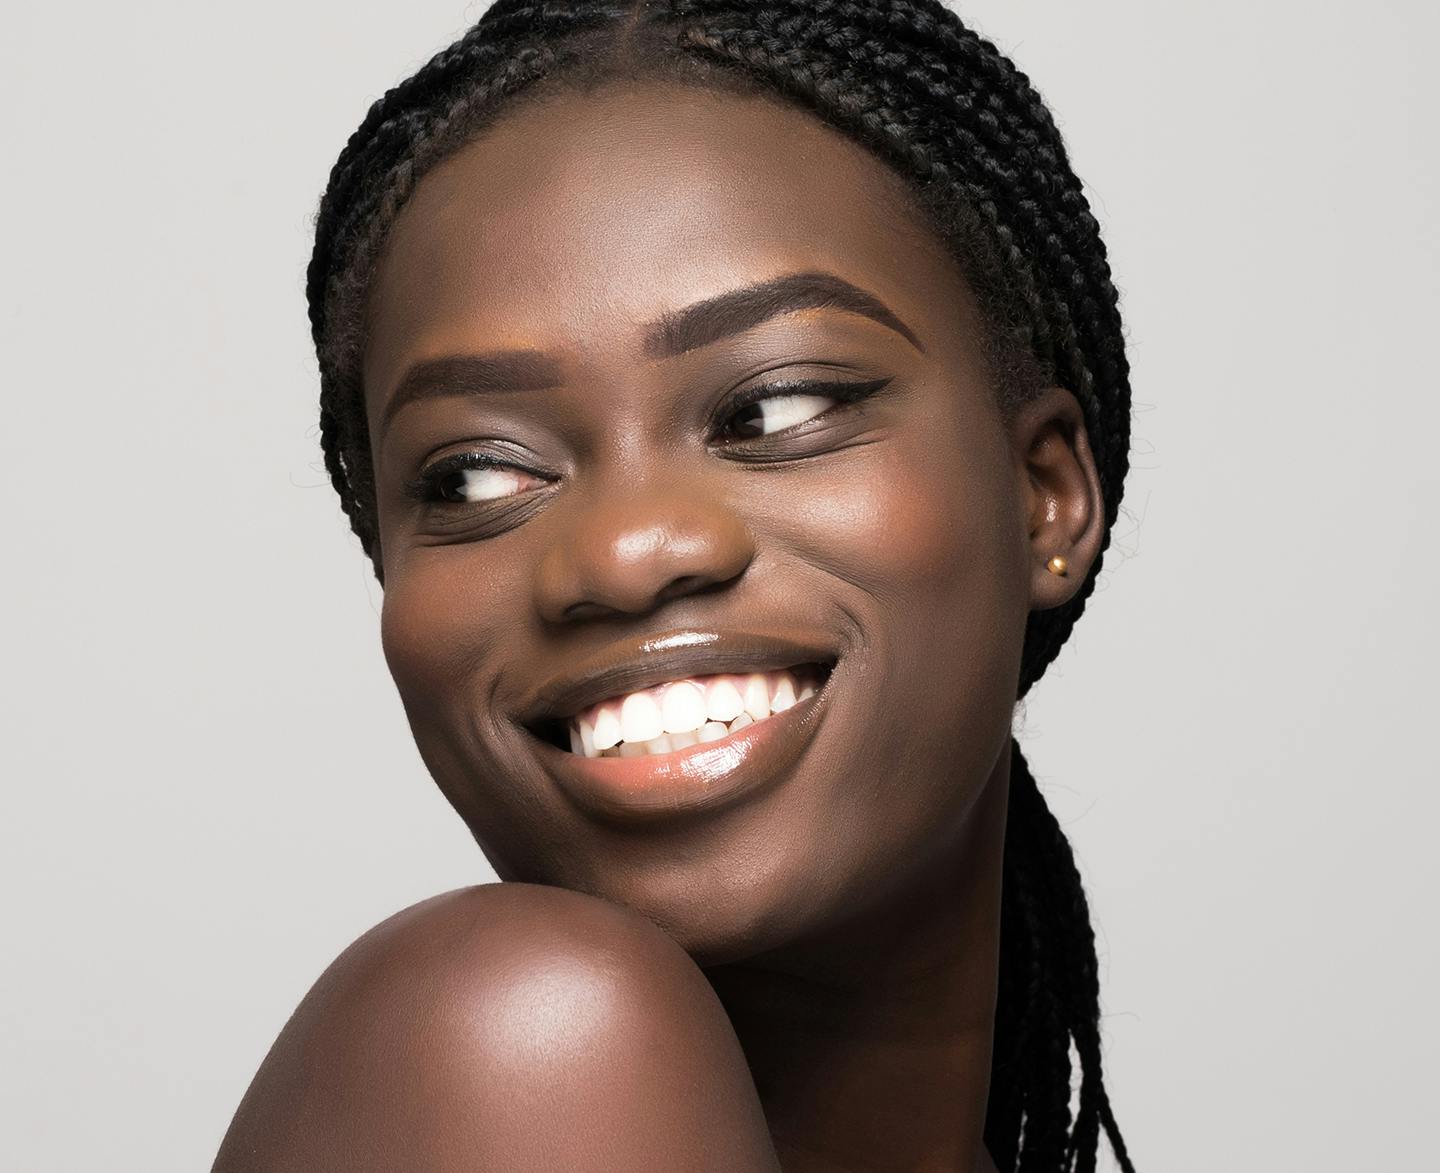 woman with black long braids smiling